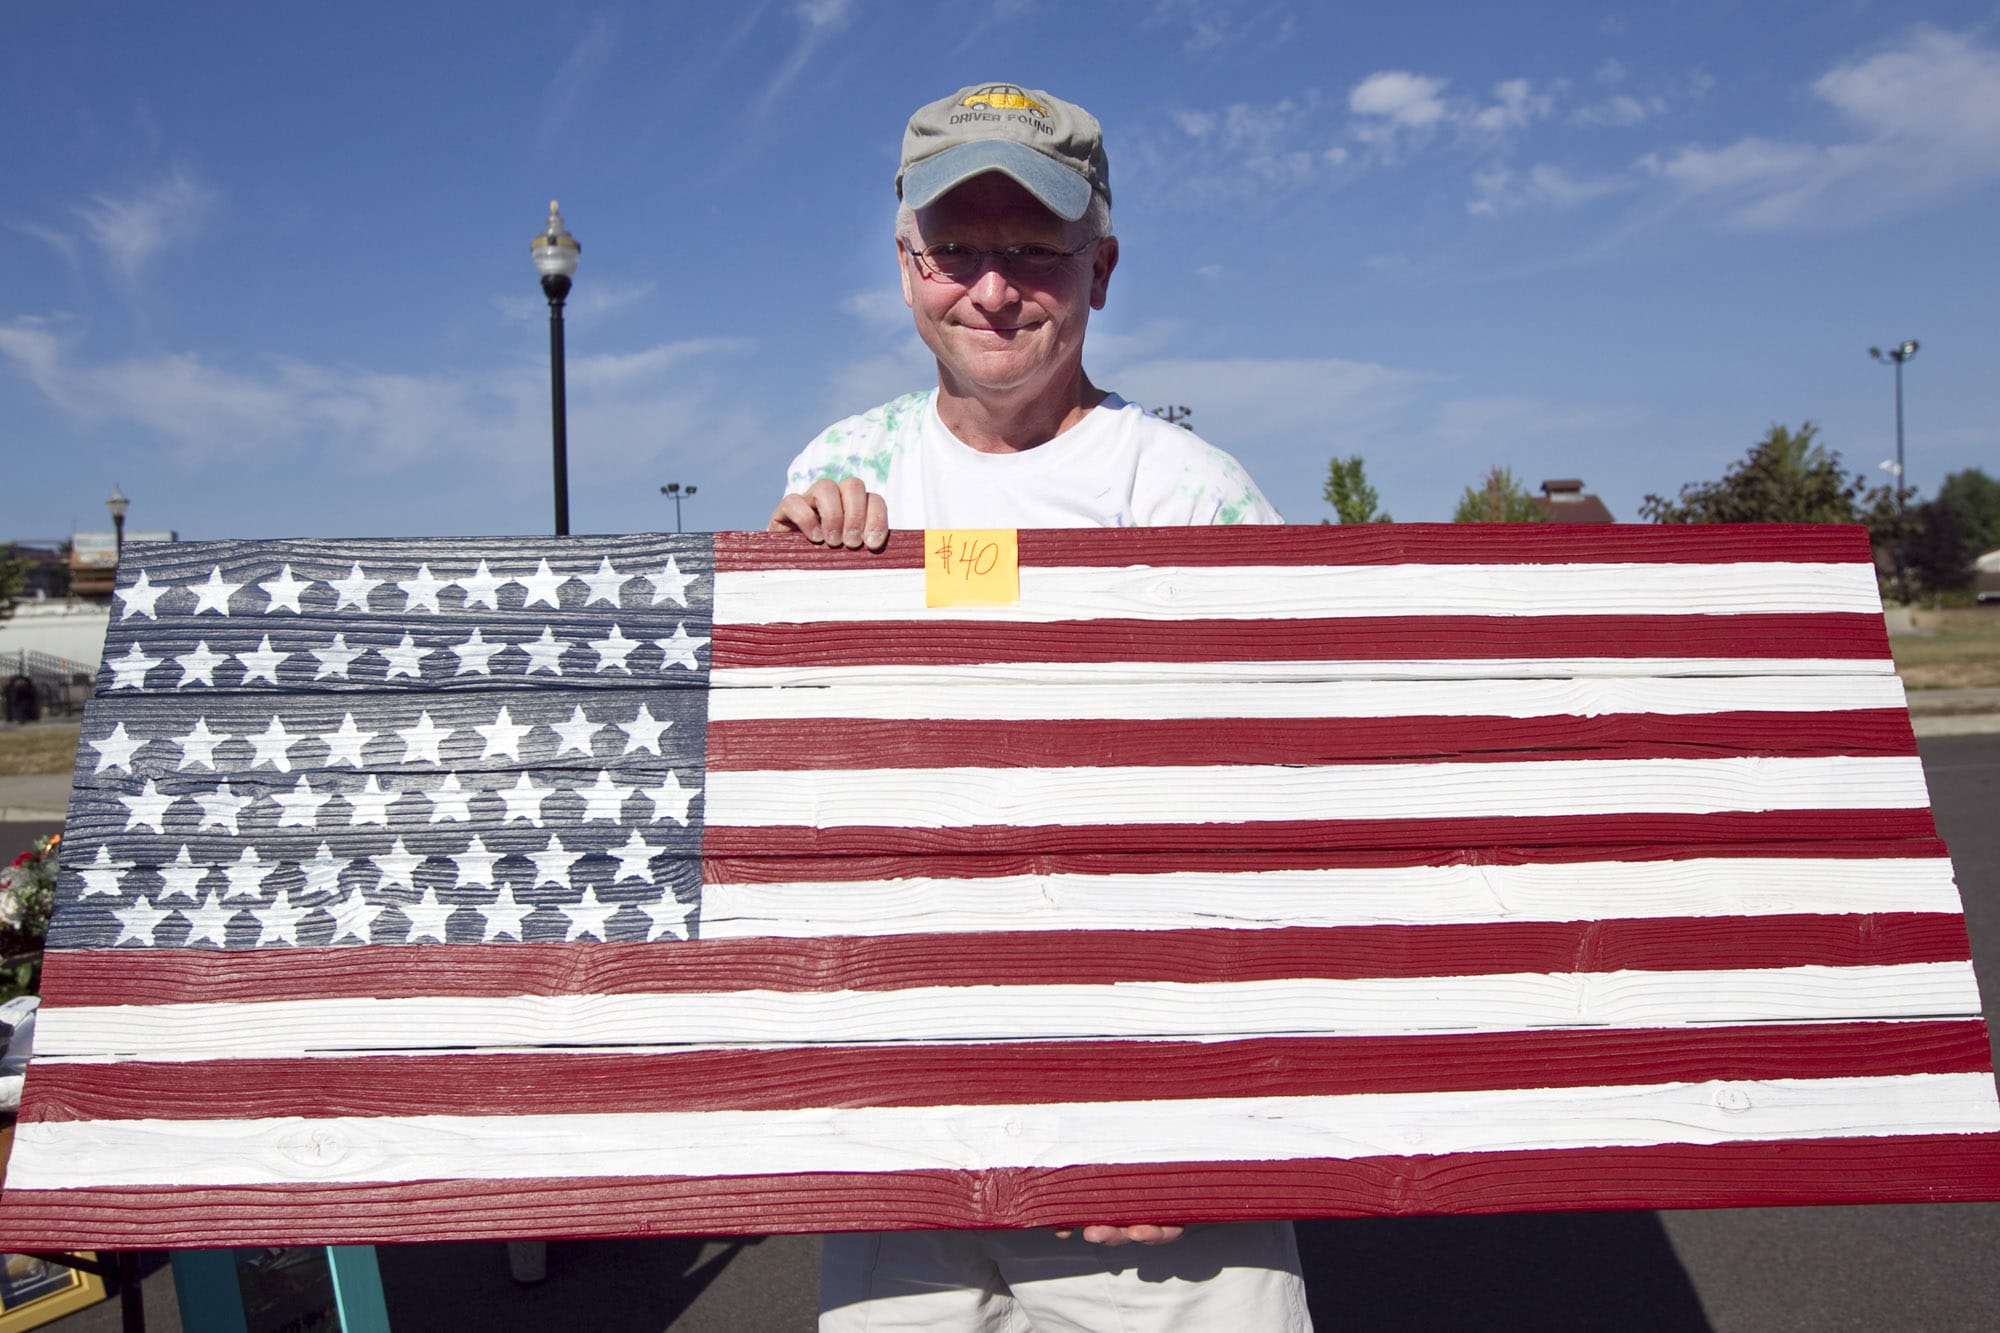 Army veteran Philip Johnson sells an American flag wall hanging he made from reclaimed cedar at a flea market to raise funds to build a veterans memorial in Battle Ground.